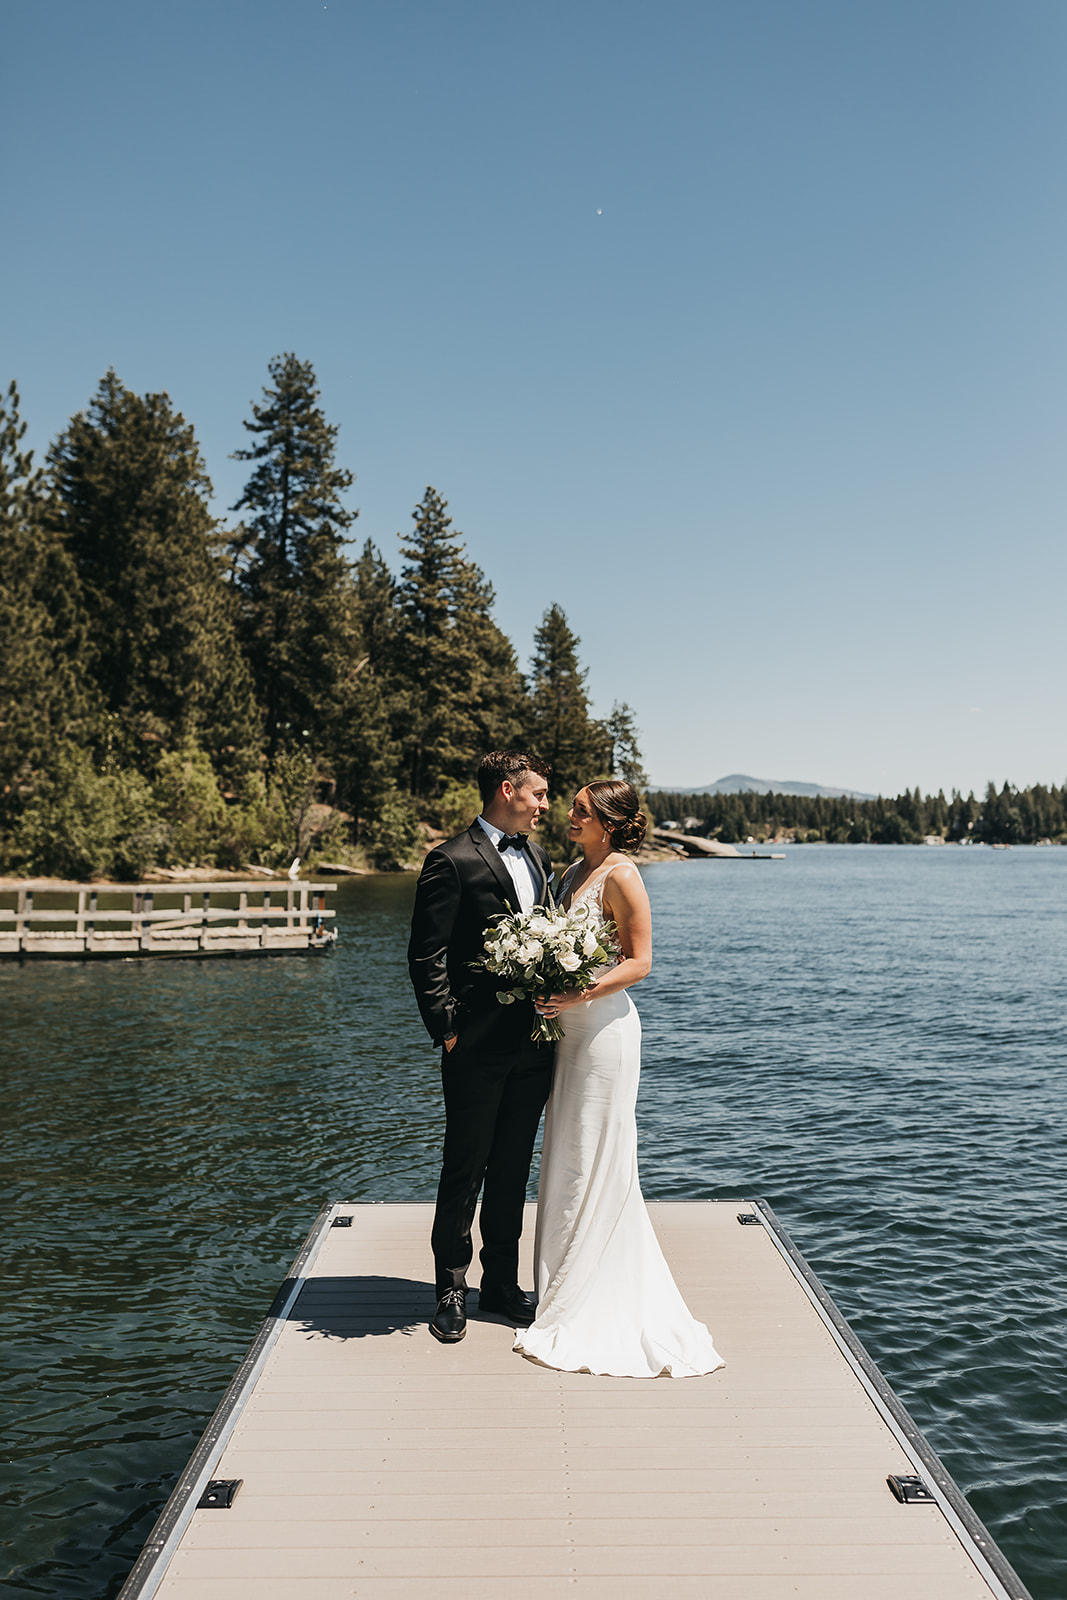 Bride and groom intimate moment on private dock before the wedding ceremony on lake front property.